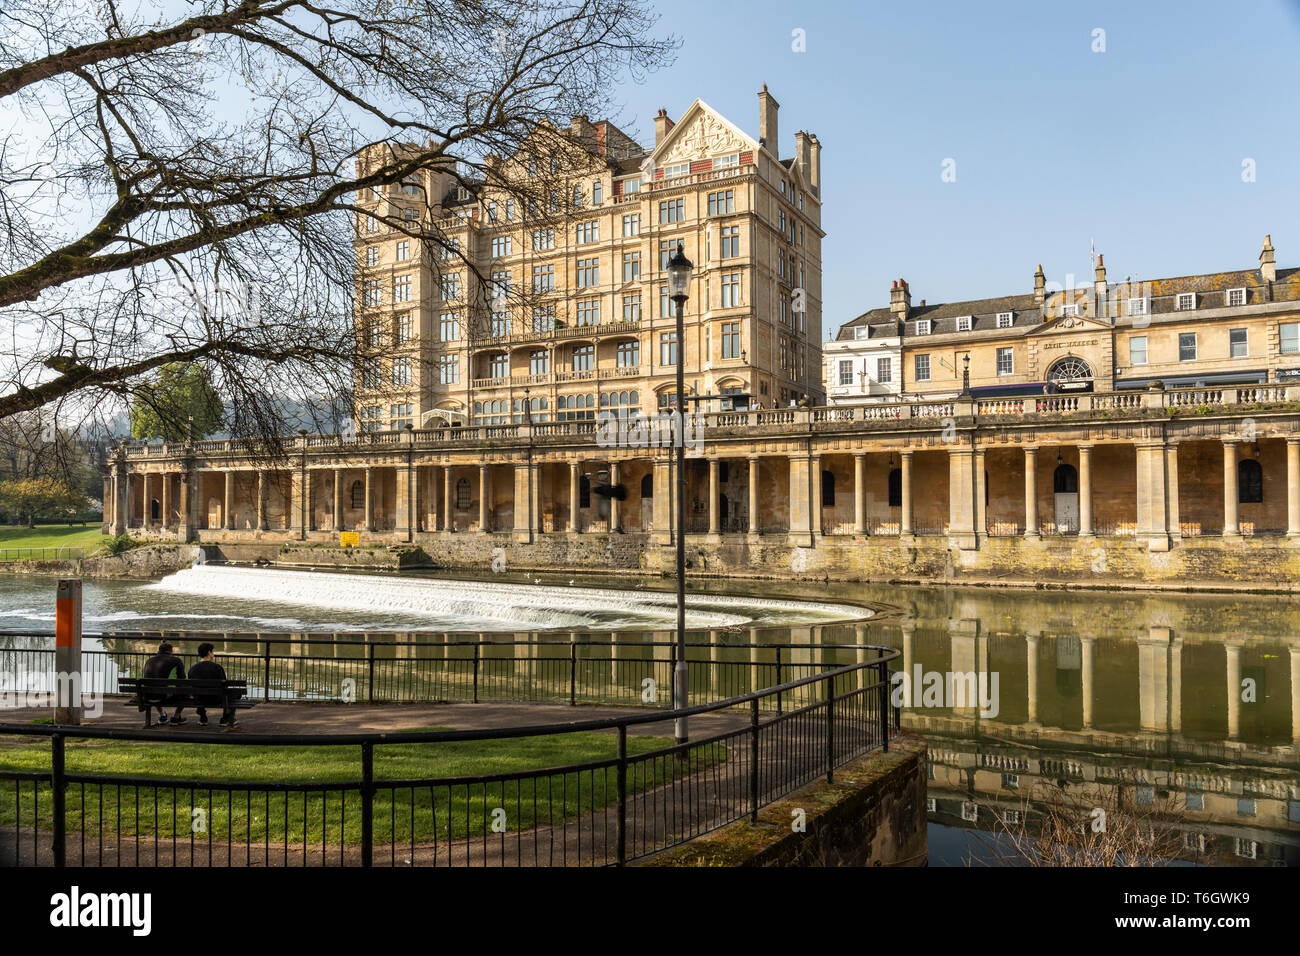 The Empire Hotel Grand Parade with reflections in the river Avon, City of Bath, Somerset, England, UK Stock Photo